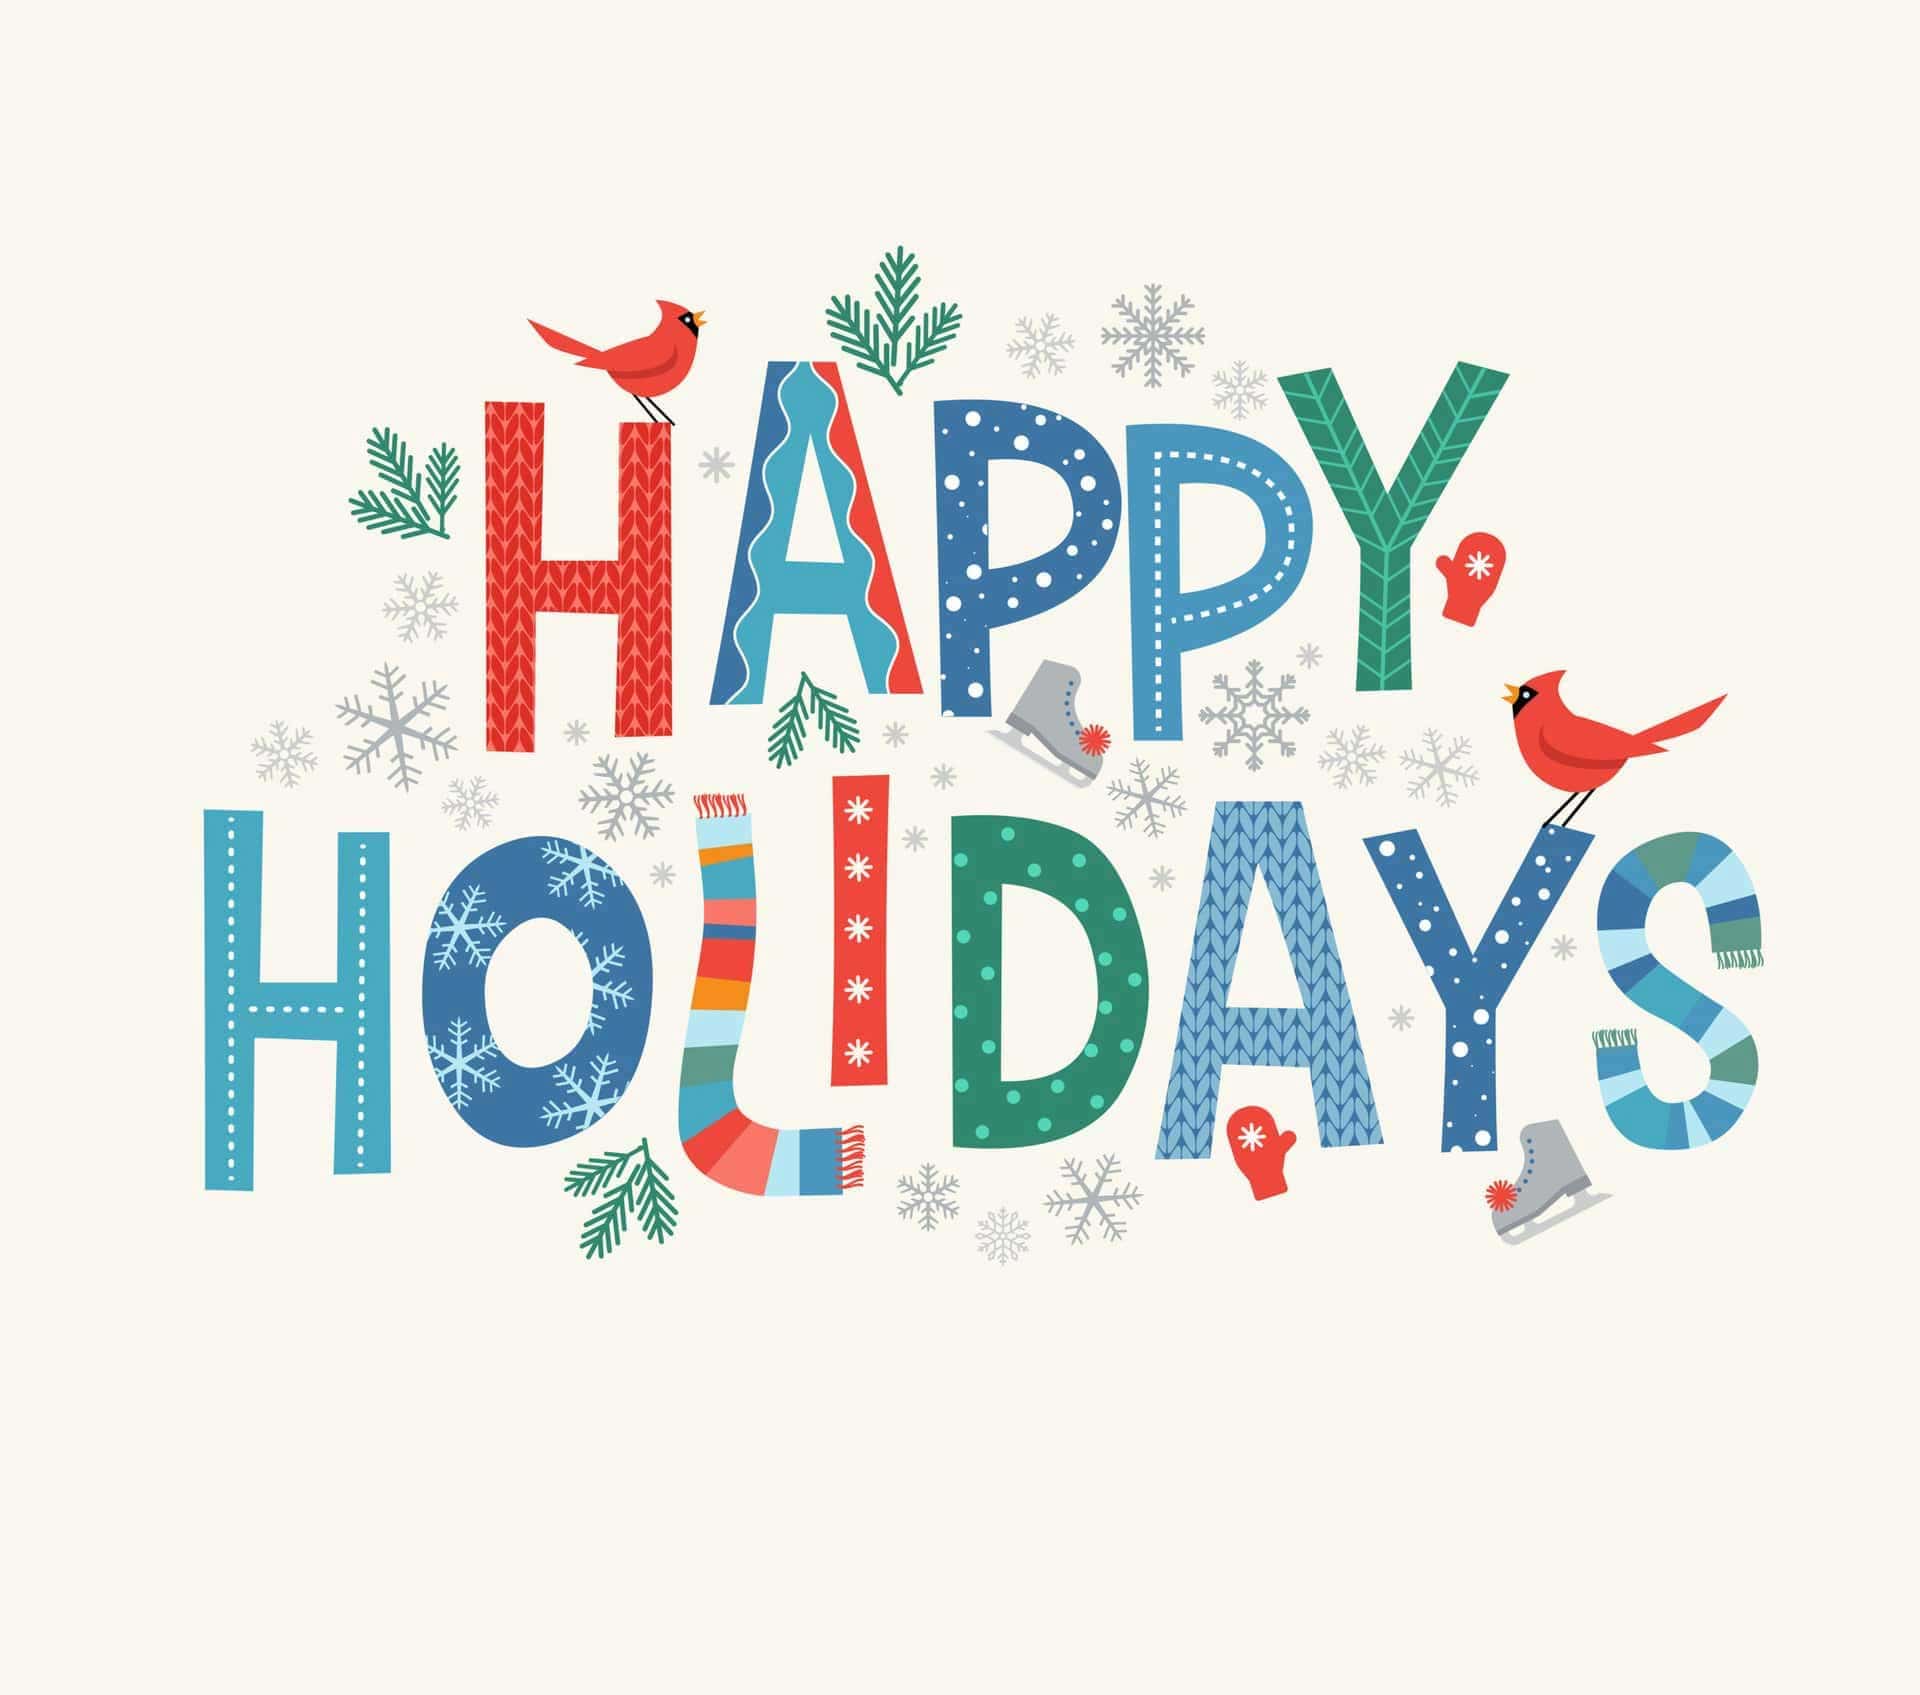 The team at Burg Children's Dentistry & Orthodontics wishes you a season filled with joy, laughter, and beautiful smiles.